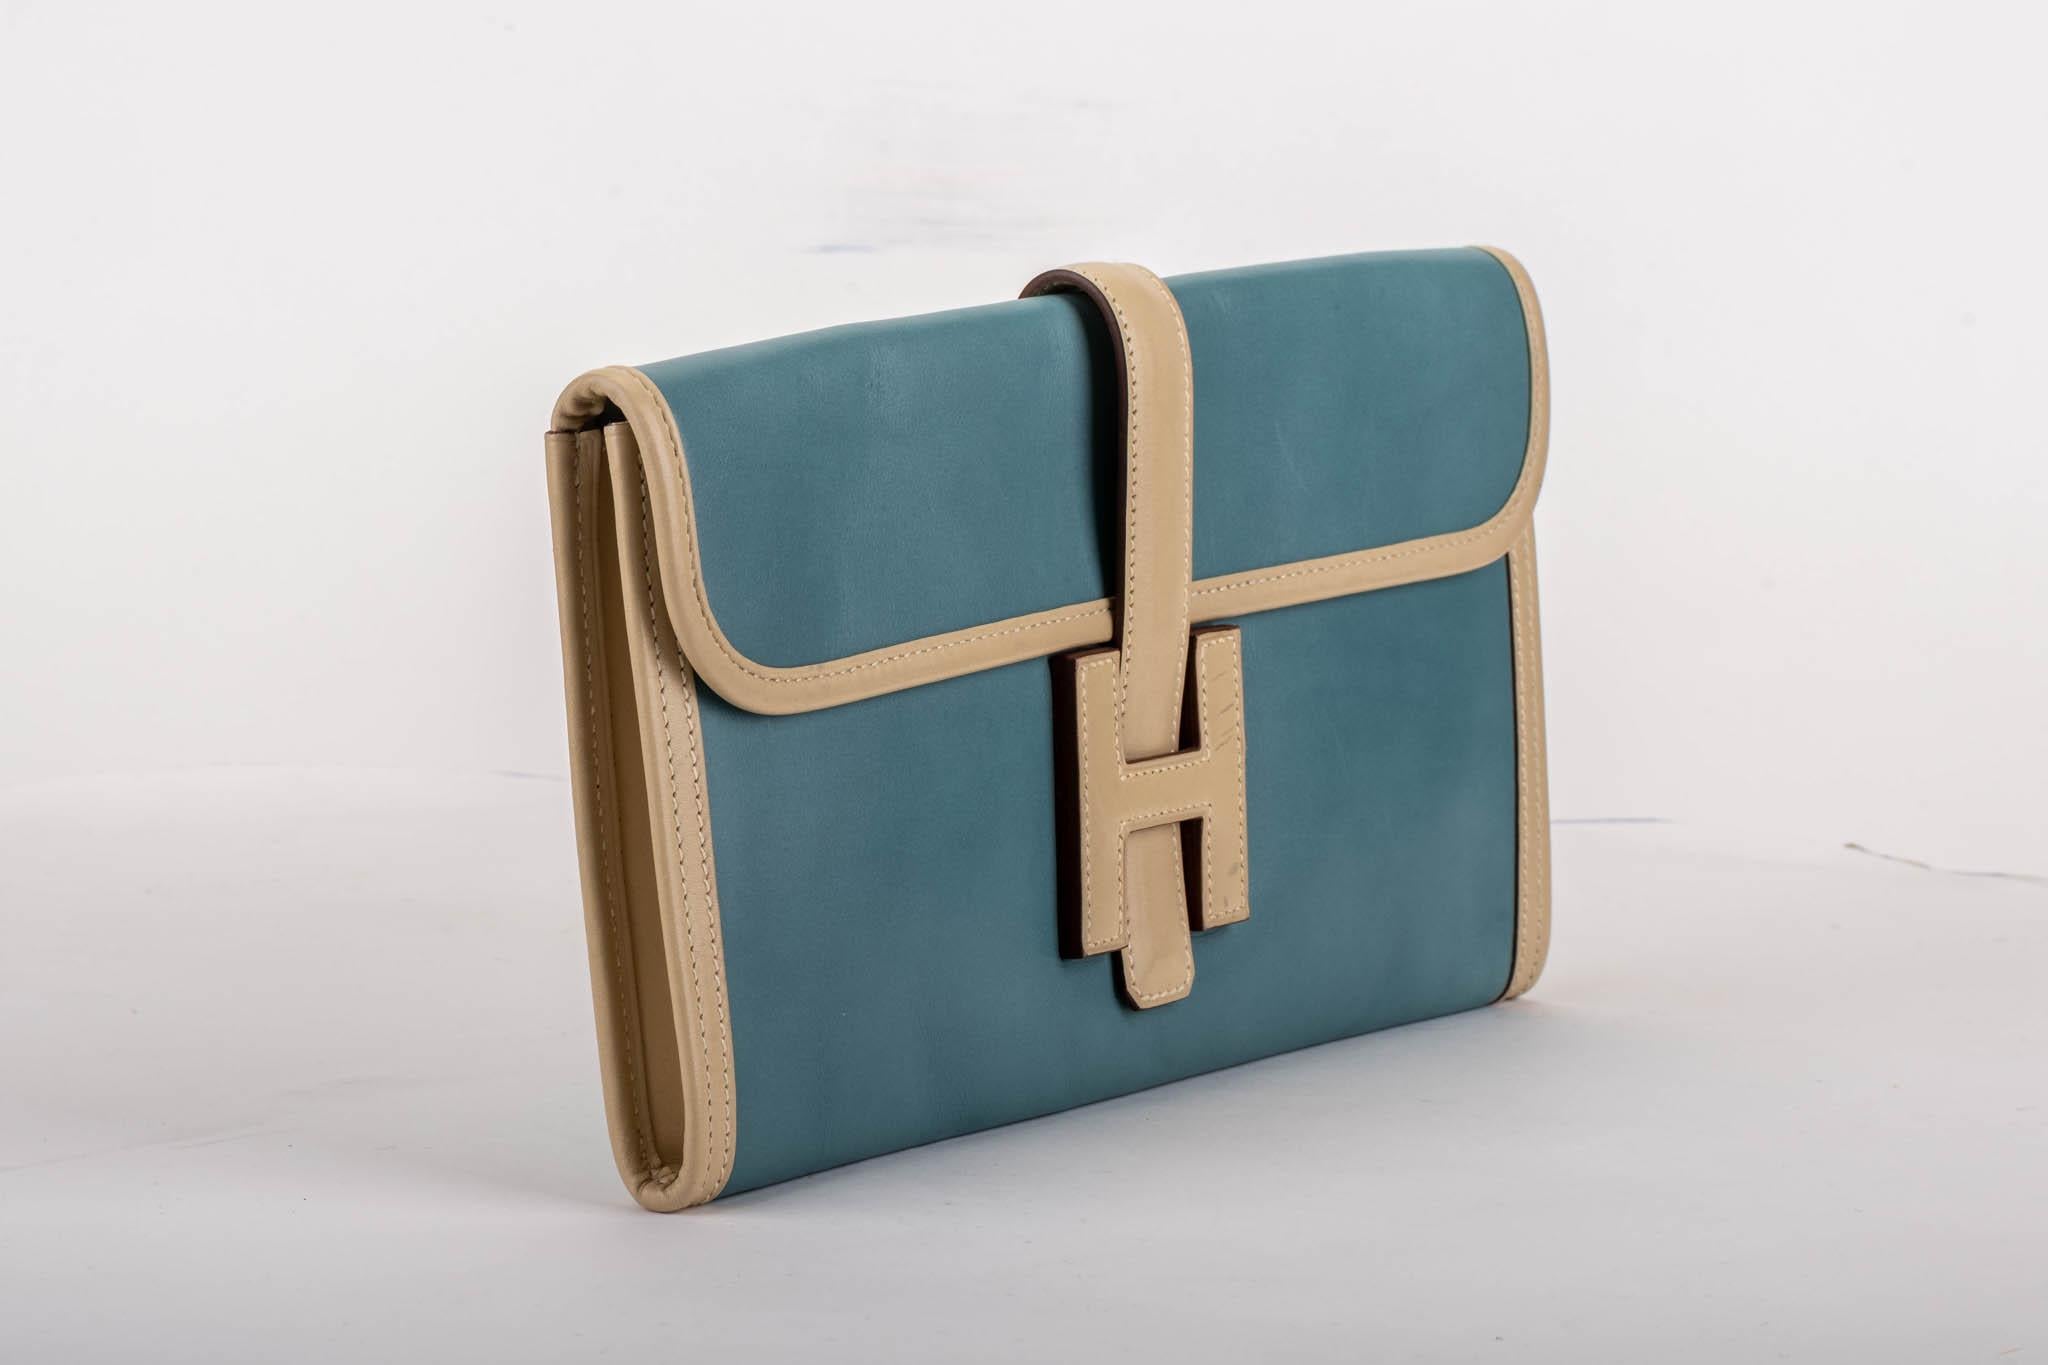 Hermes jige élan 29cm bicolor in blue and cream in swift leather. Dated 